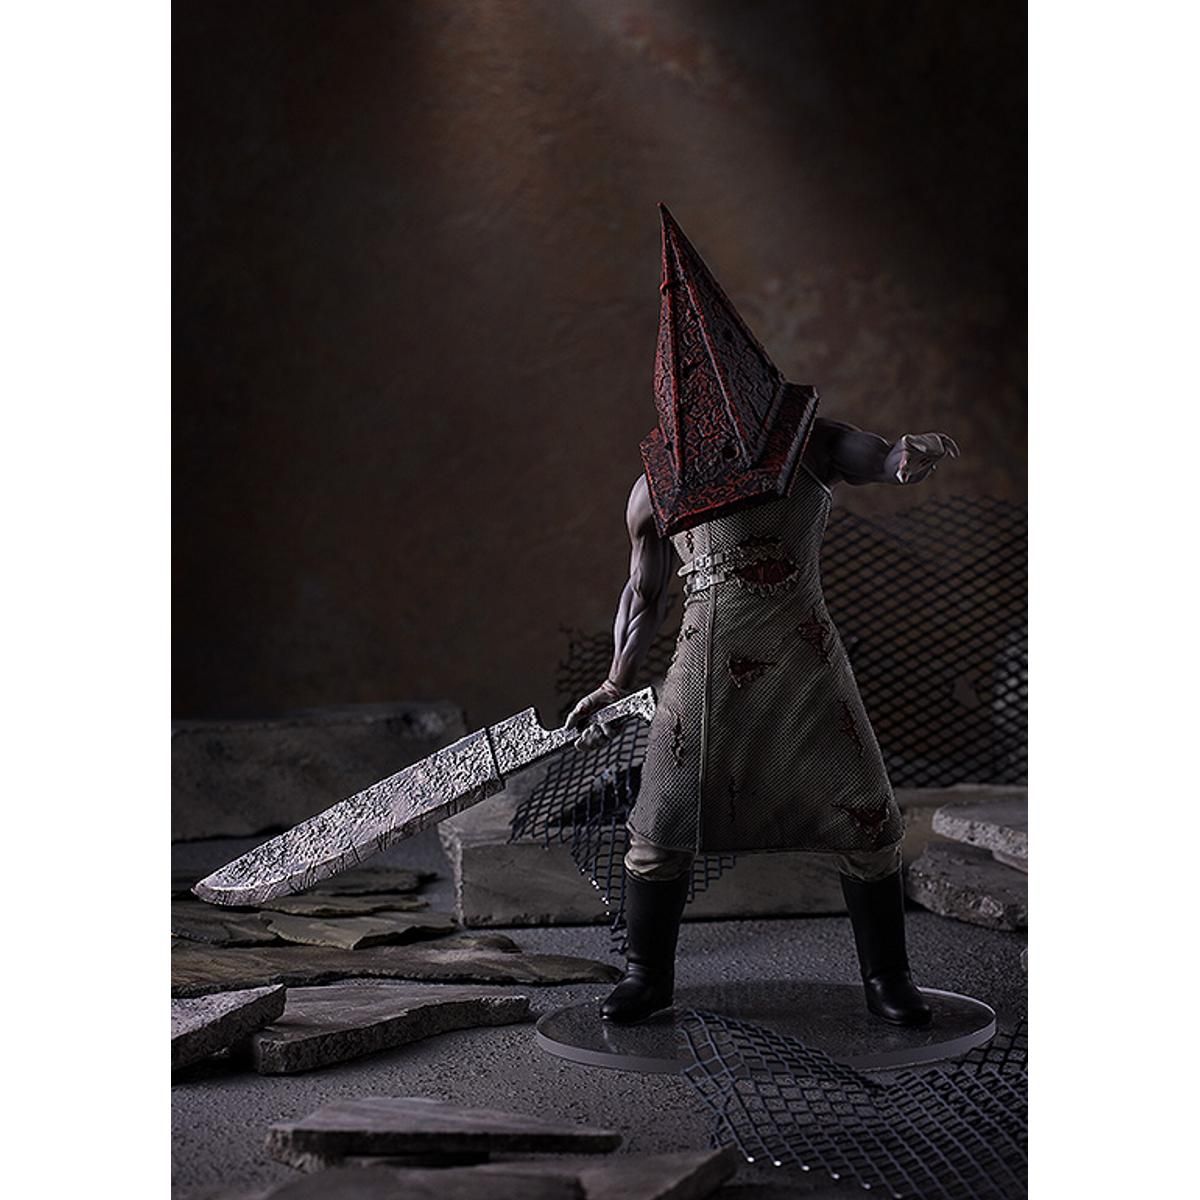 Silent Hill 2's Pyramid Head Gets New Pop Up Parade Figure